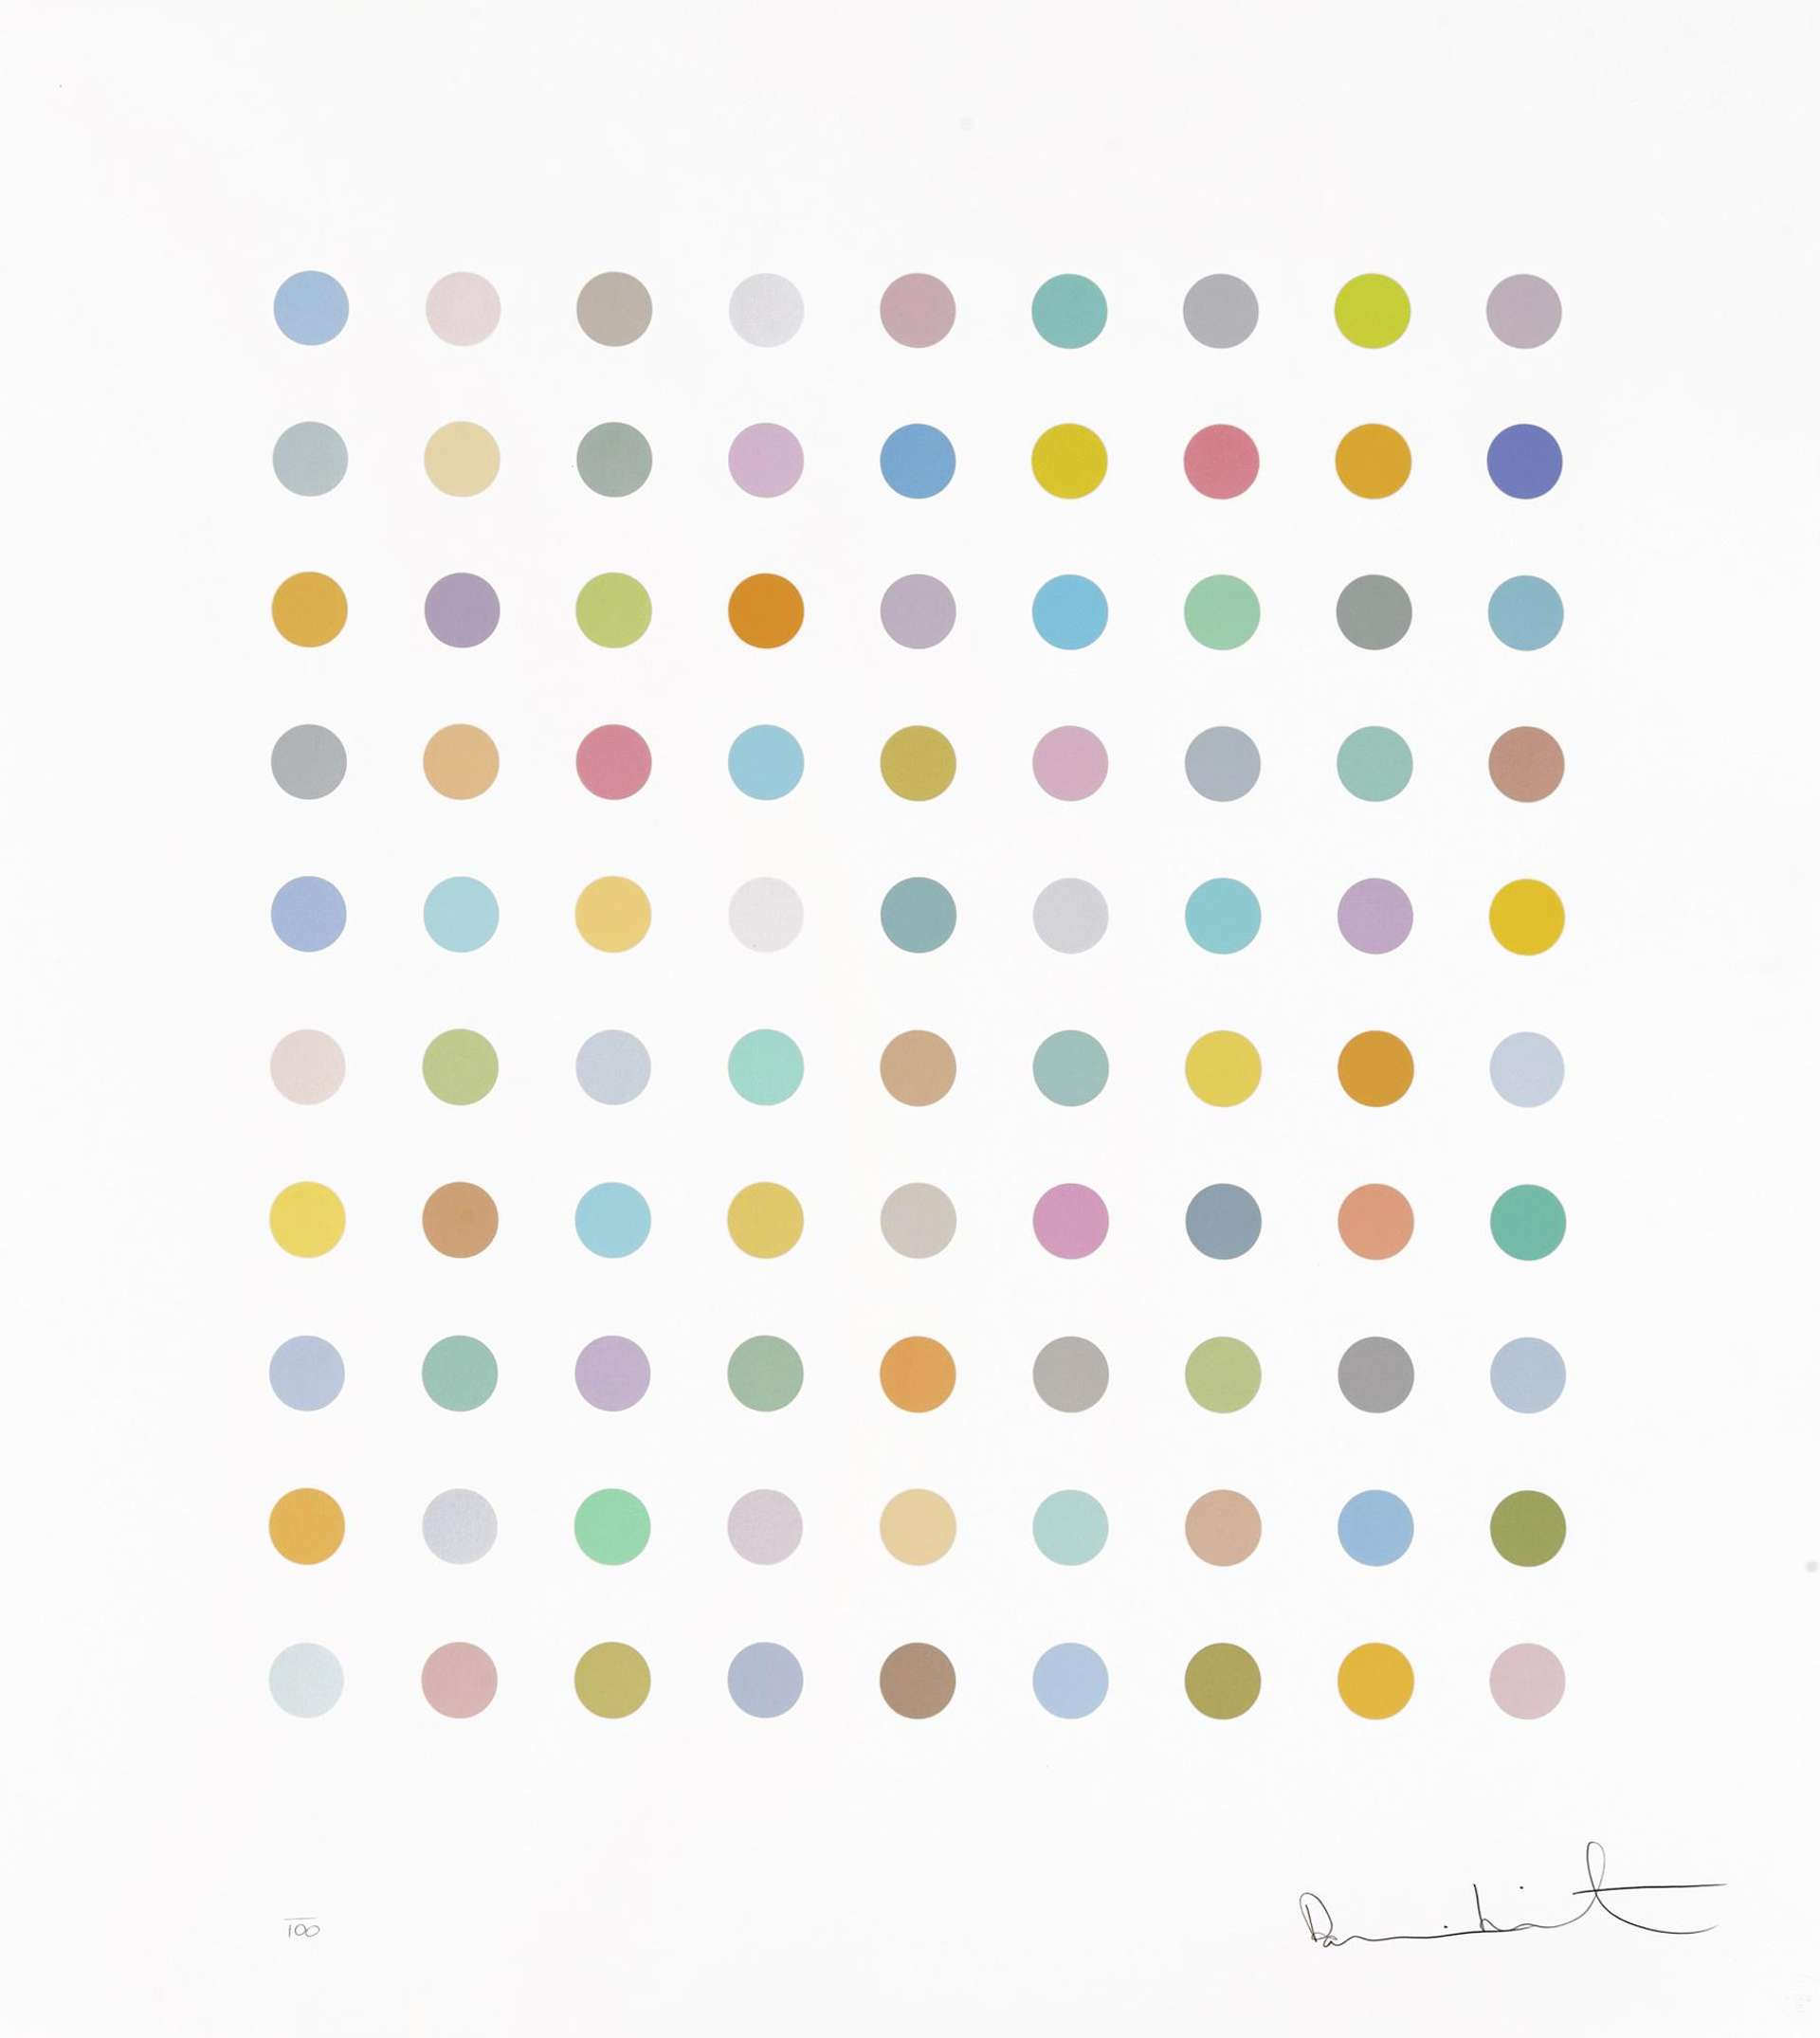 10 Facts About Damien Hirst's Spots